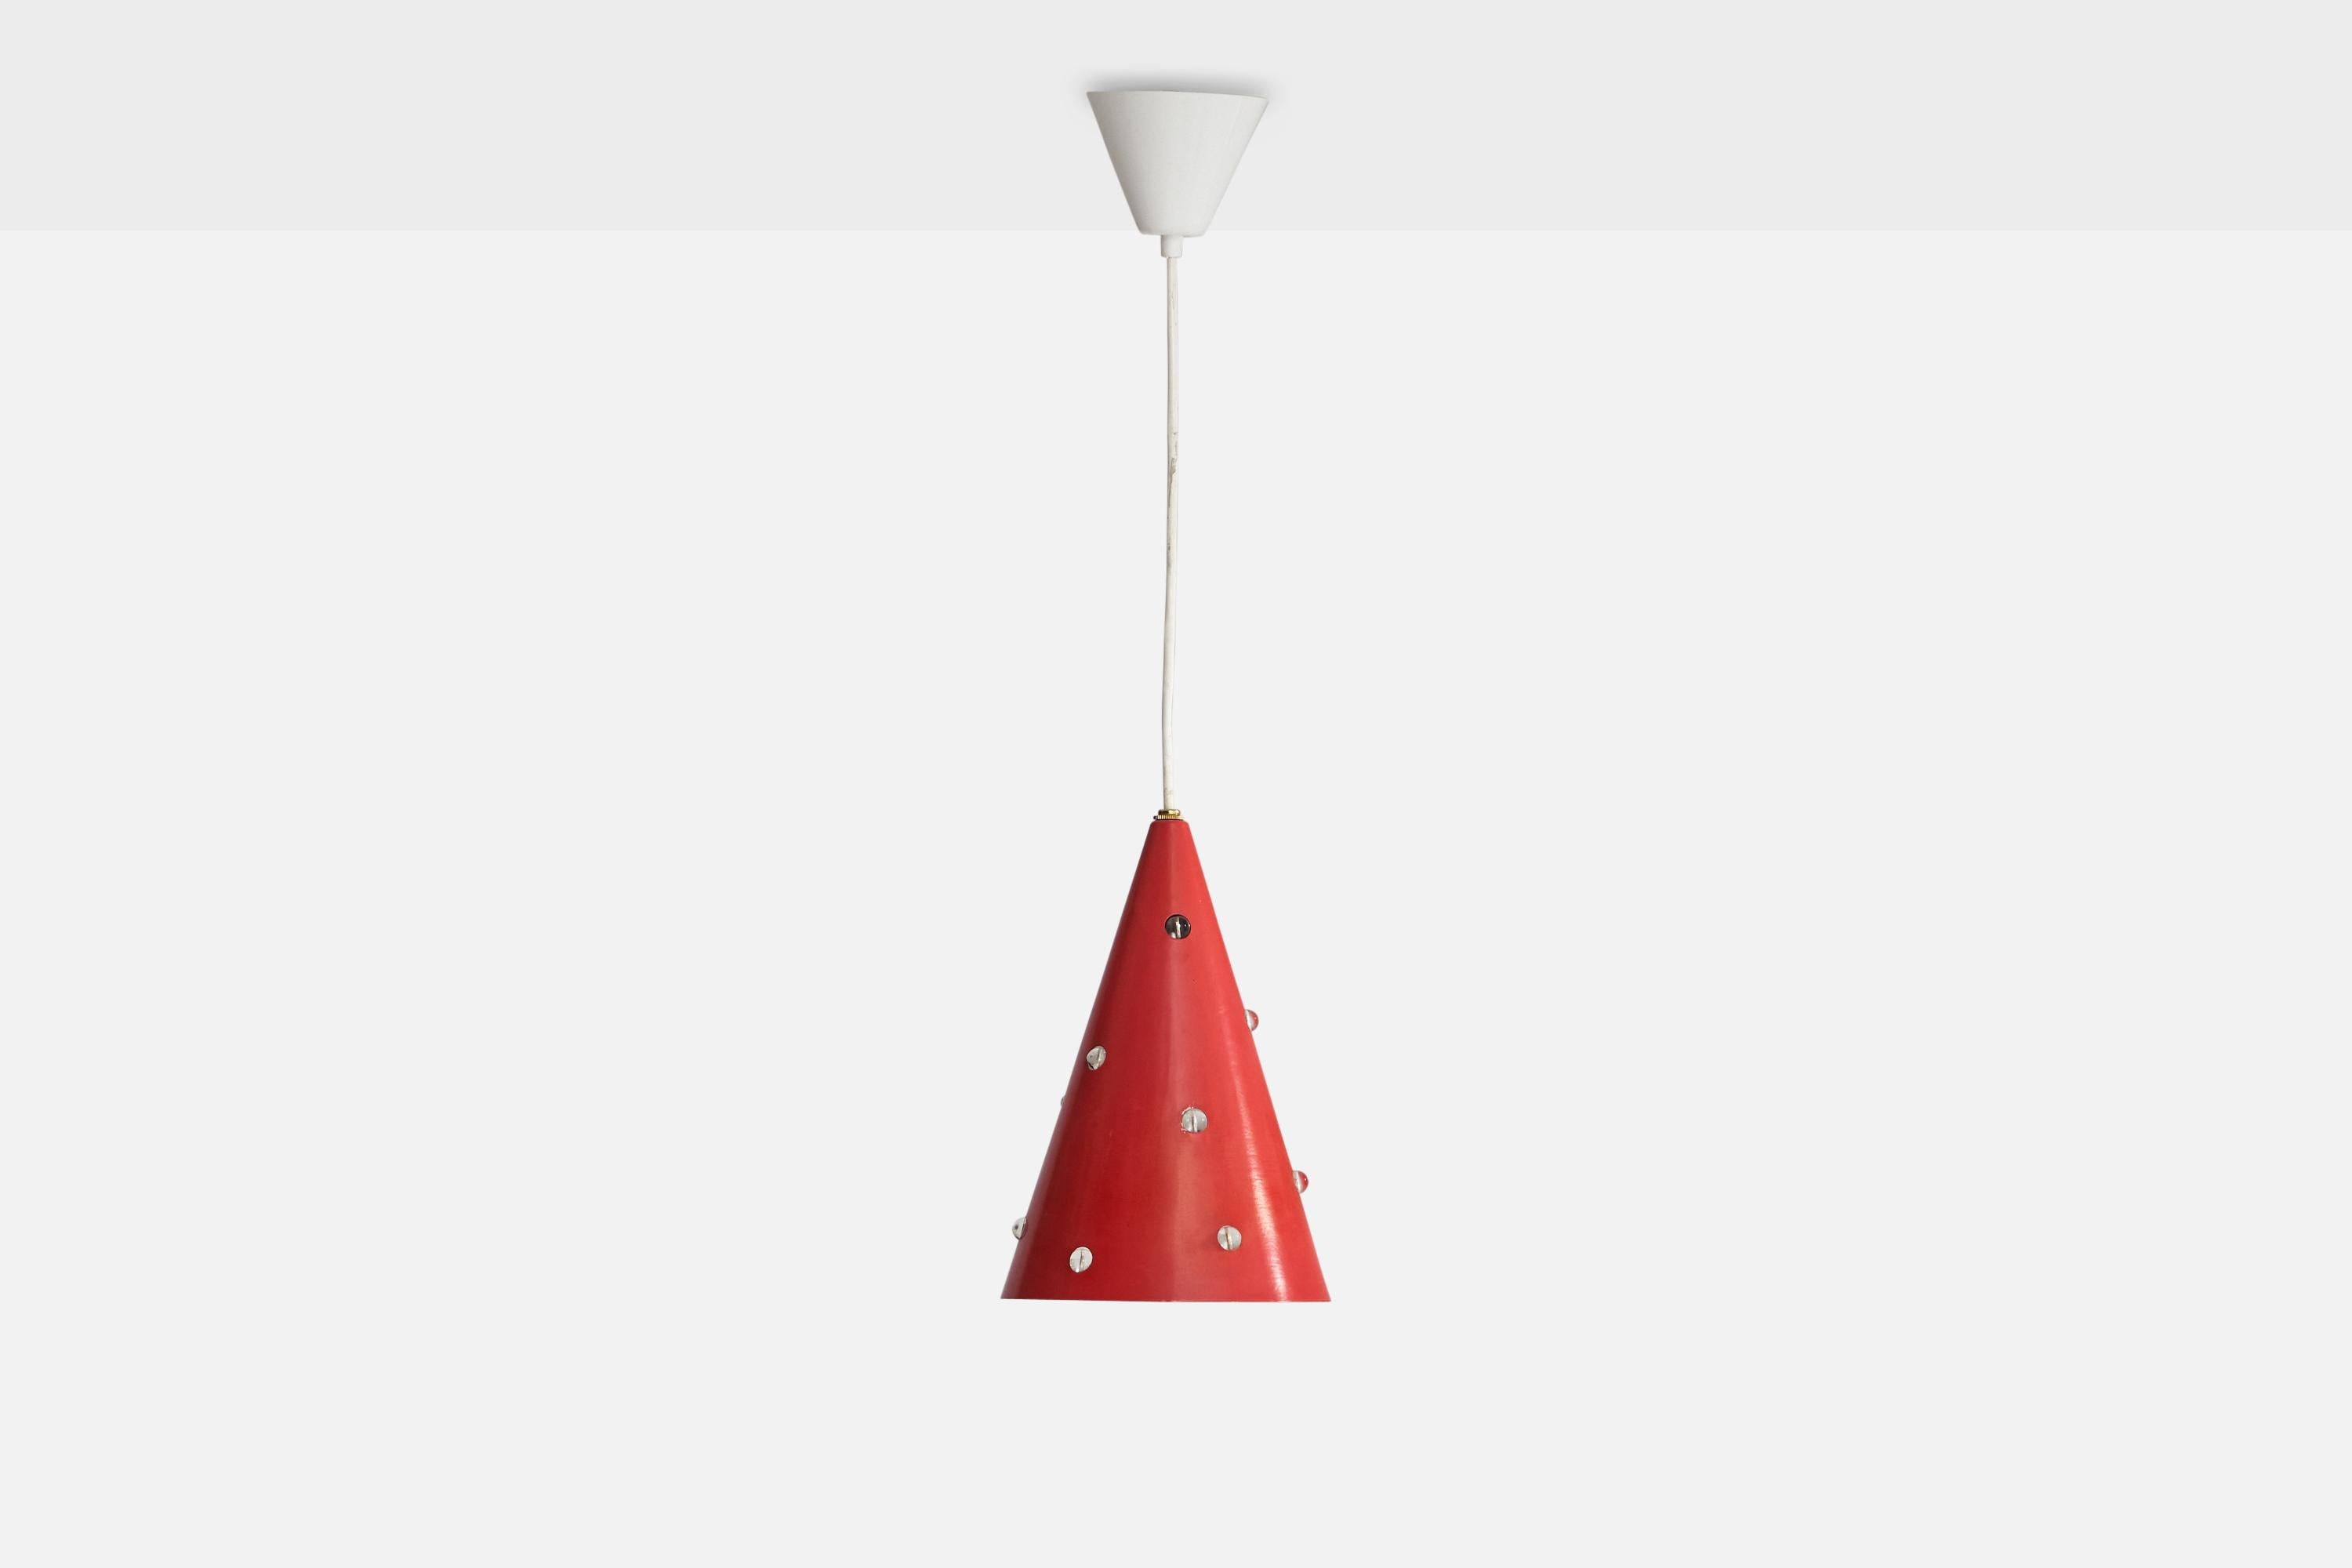 A red-lacquered metal and glass pendant light, model K-2, designed by Mauri Almari and produced by Idman, Finland, 1960s.

Dimensions of canopy (inches): 3.75” H x 4.45” Diameter
Socket takes standard E-26 bulbs. 1 socket.There is no maximum wattage